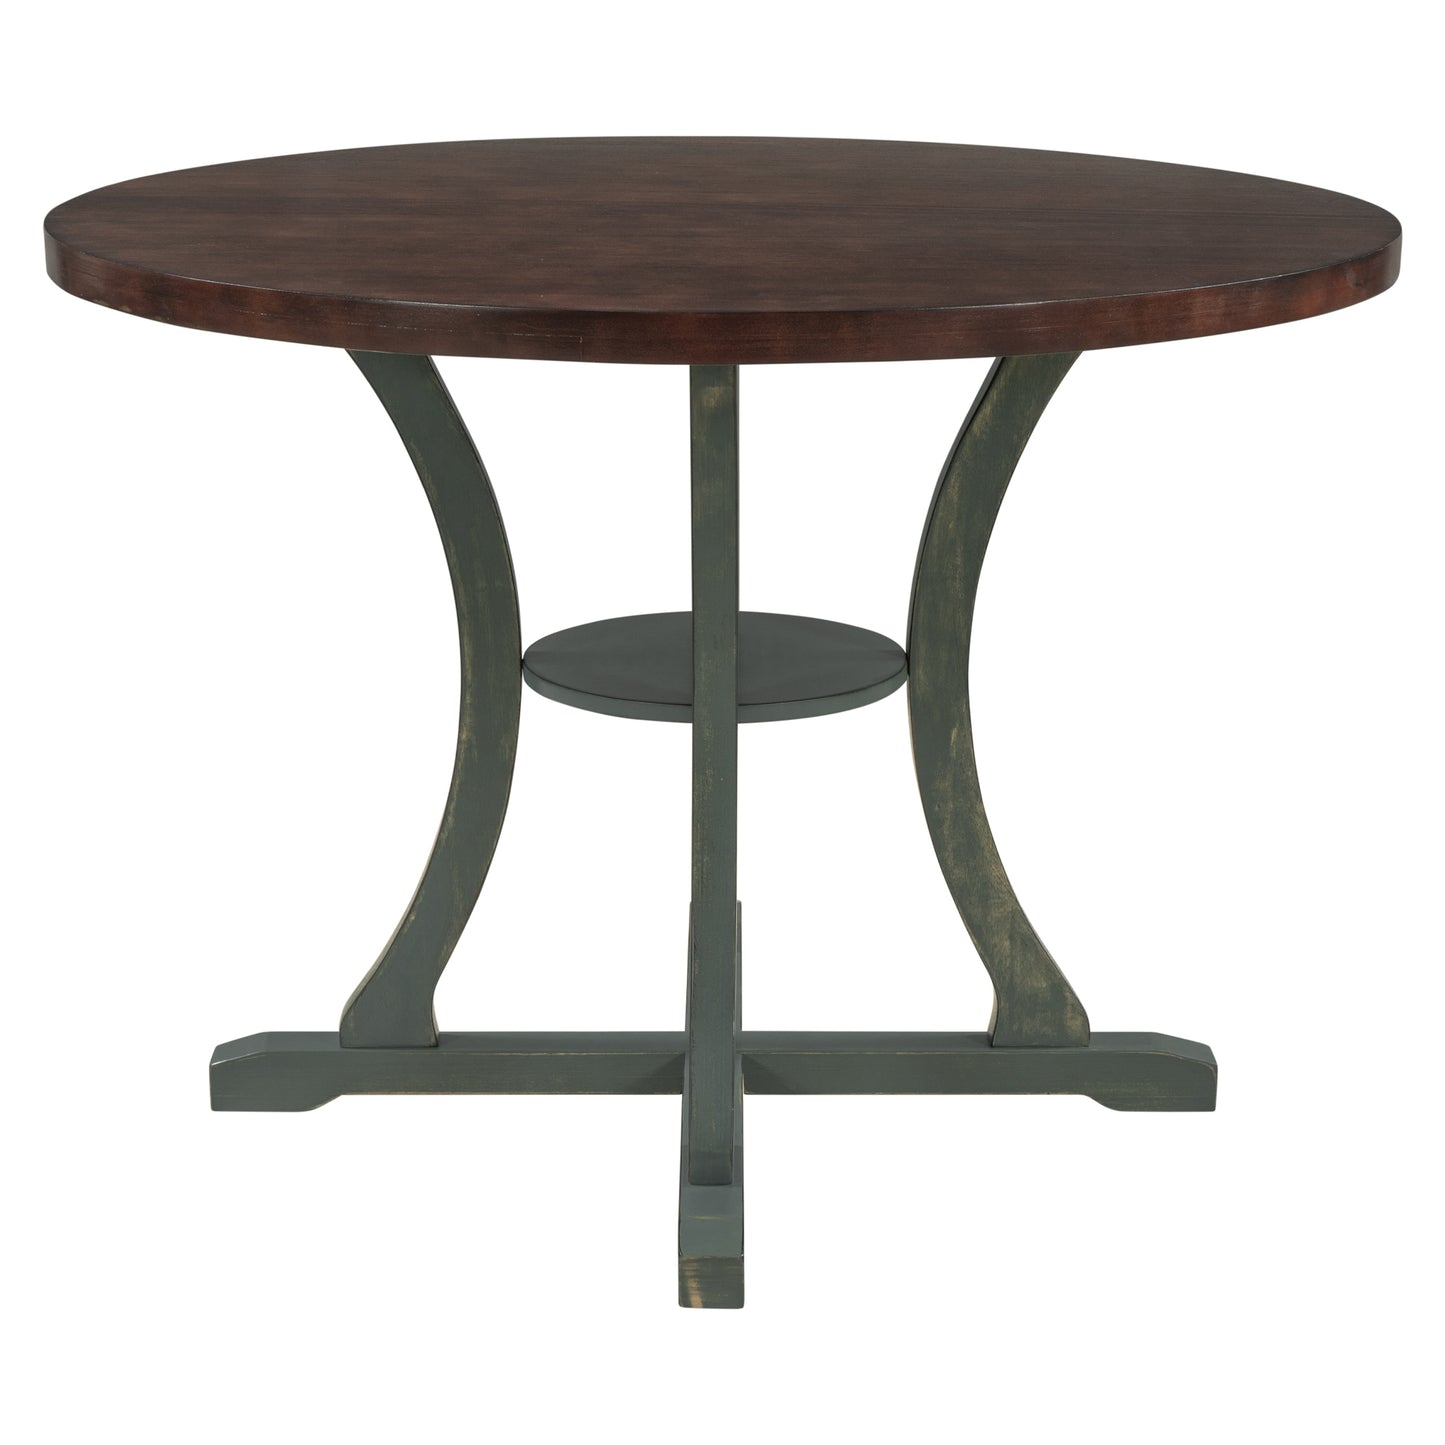 Teal TREXM 5-Piece Round Table & Chairs Set